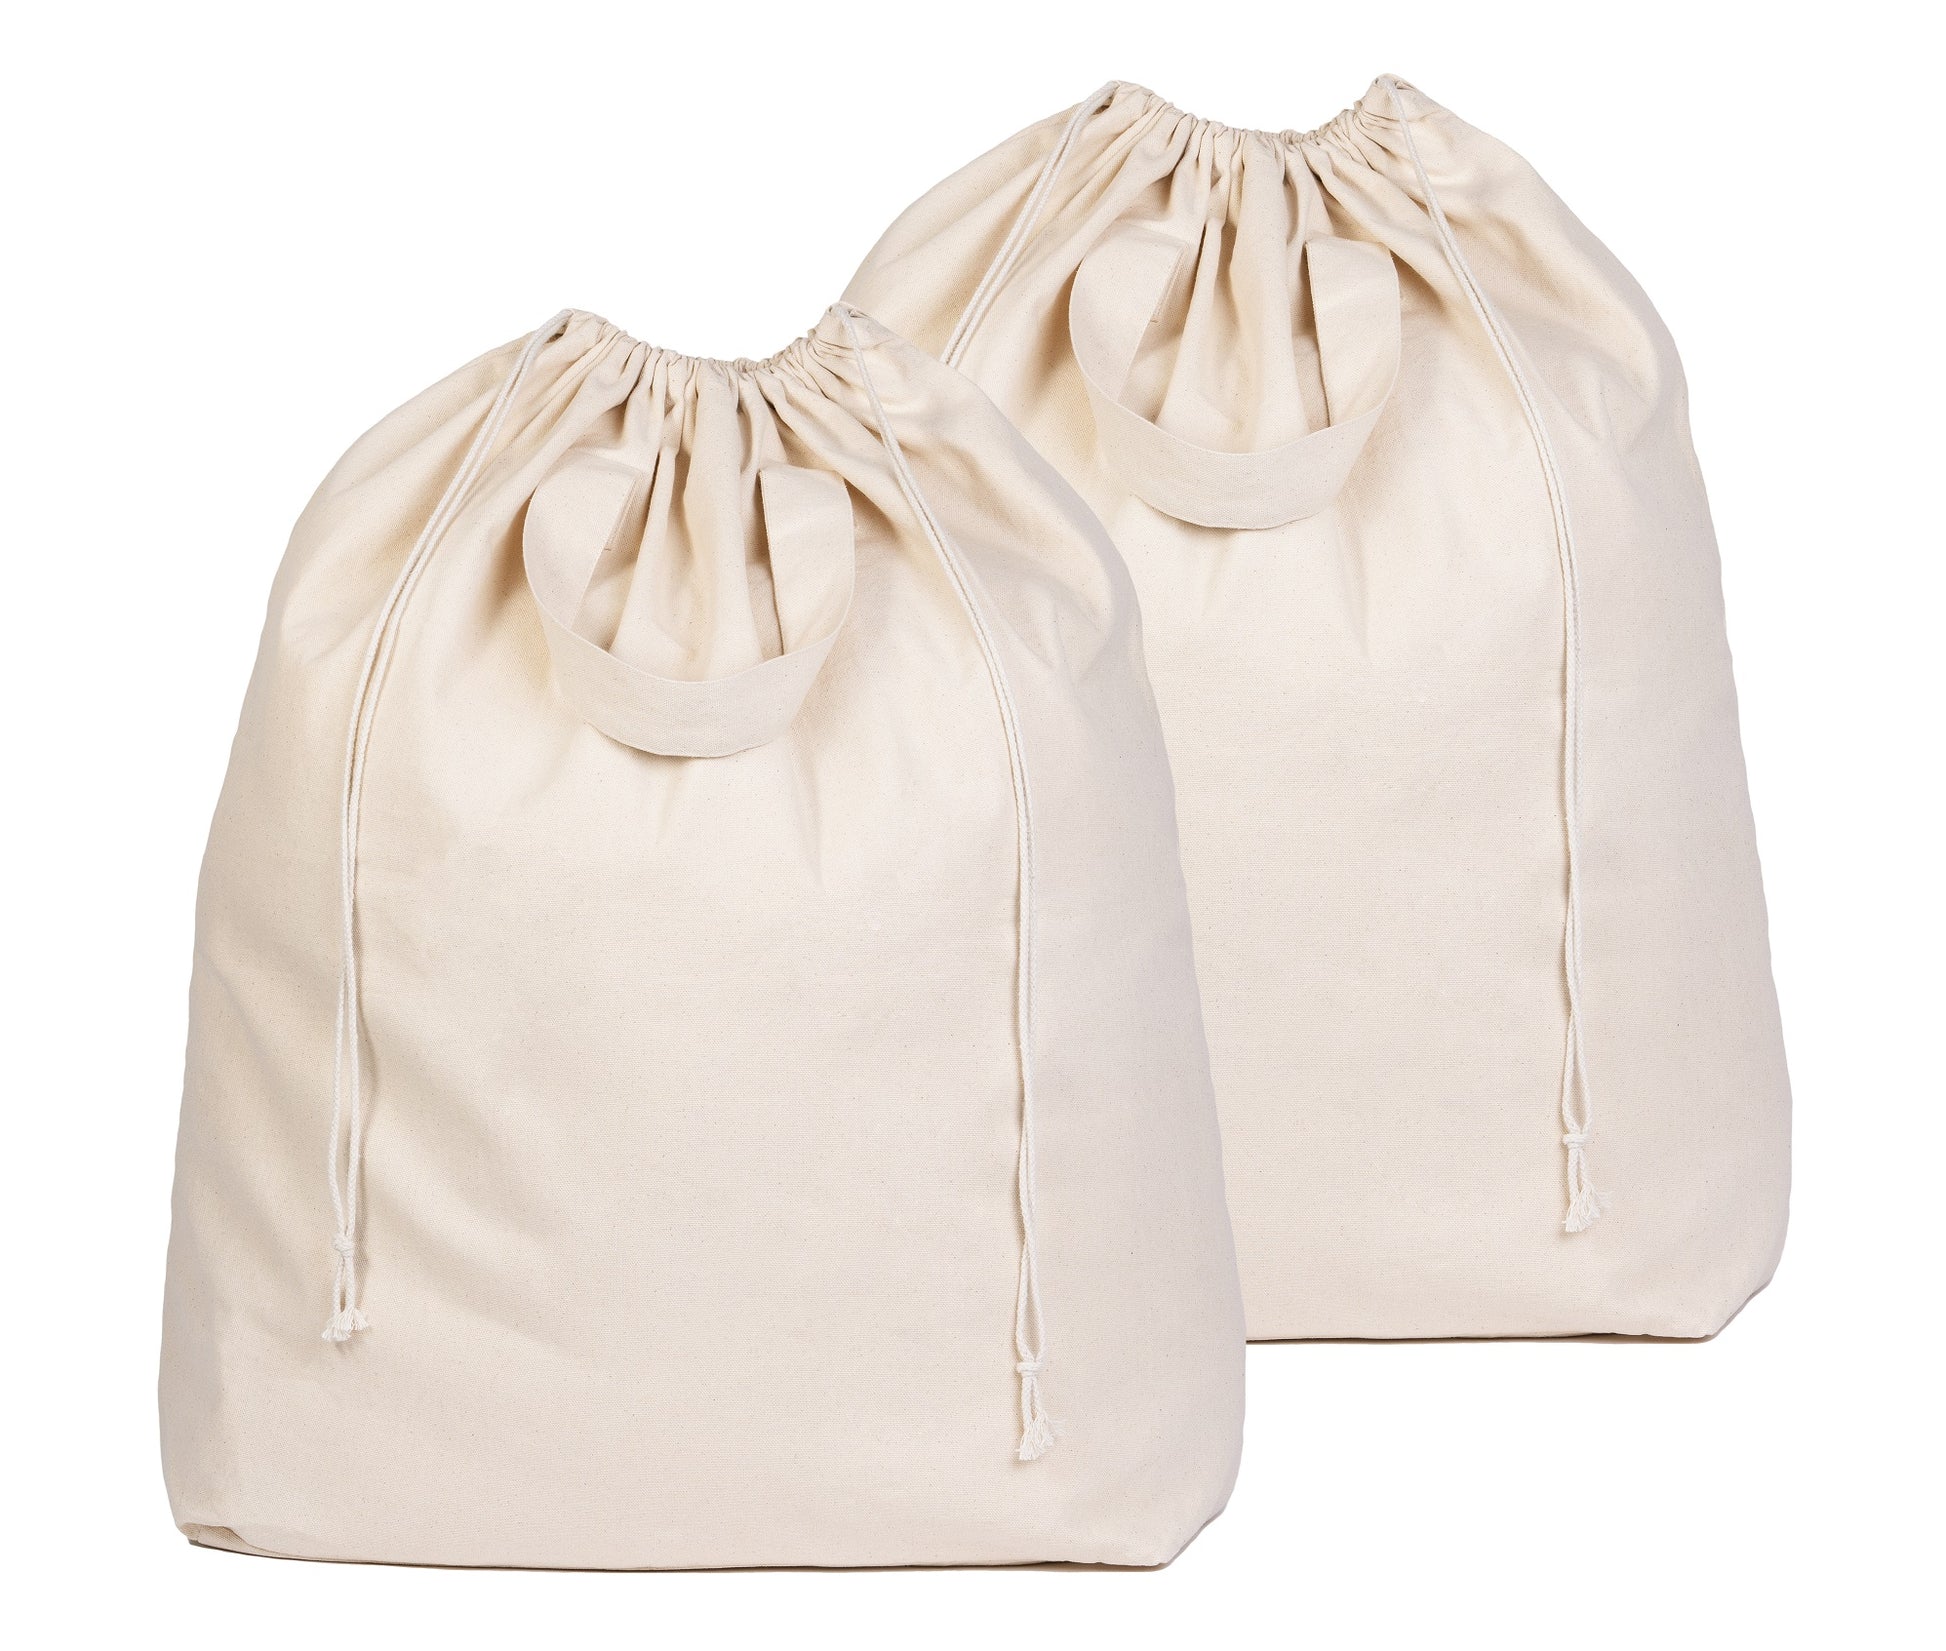 Buy Cotton Canvas Laundry Bag with Handles